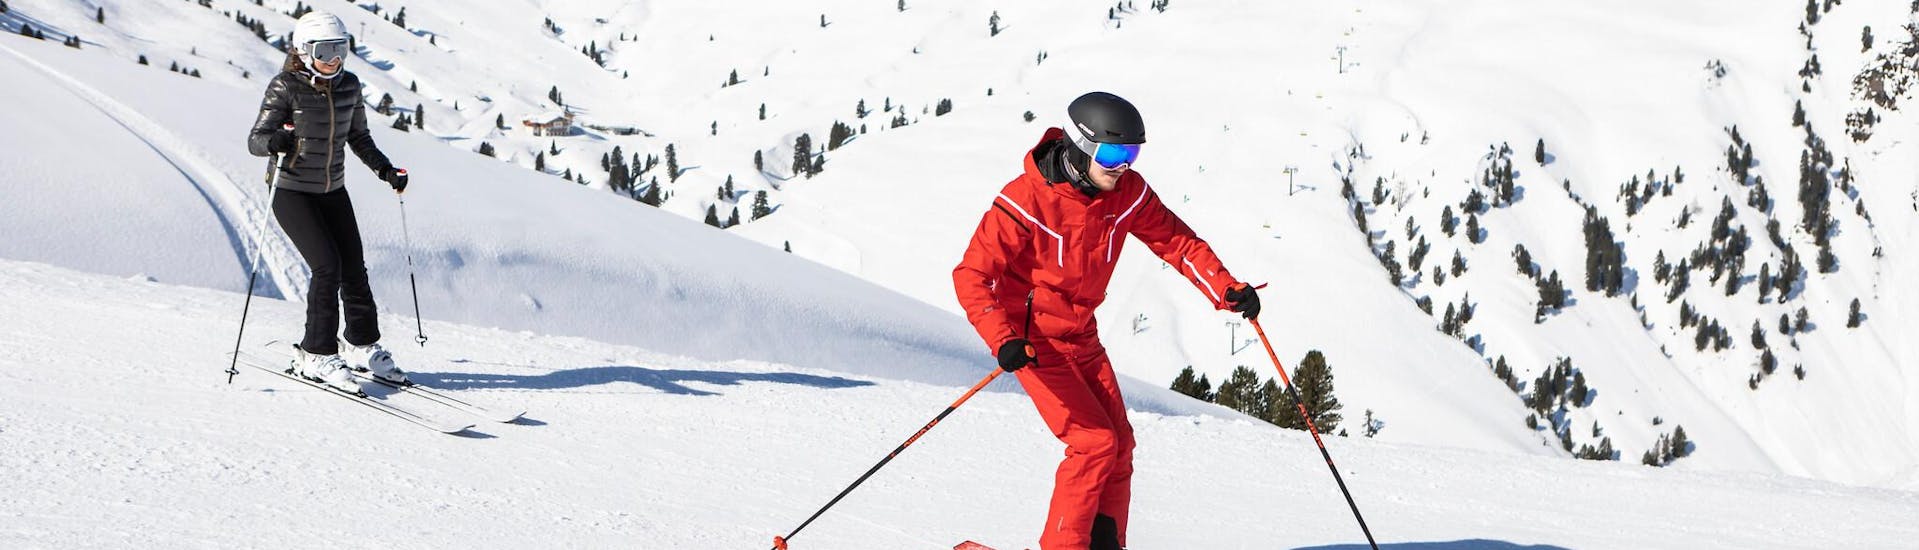 A skier practices the correct skiing technique during one of the private lessons in Ski Amadé Schladming Dachstein.